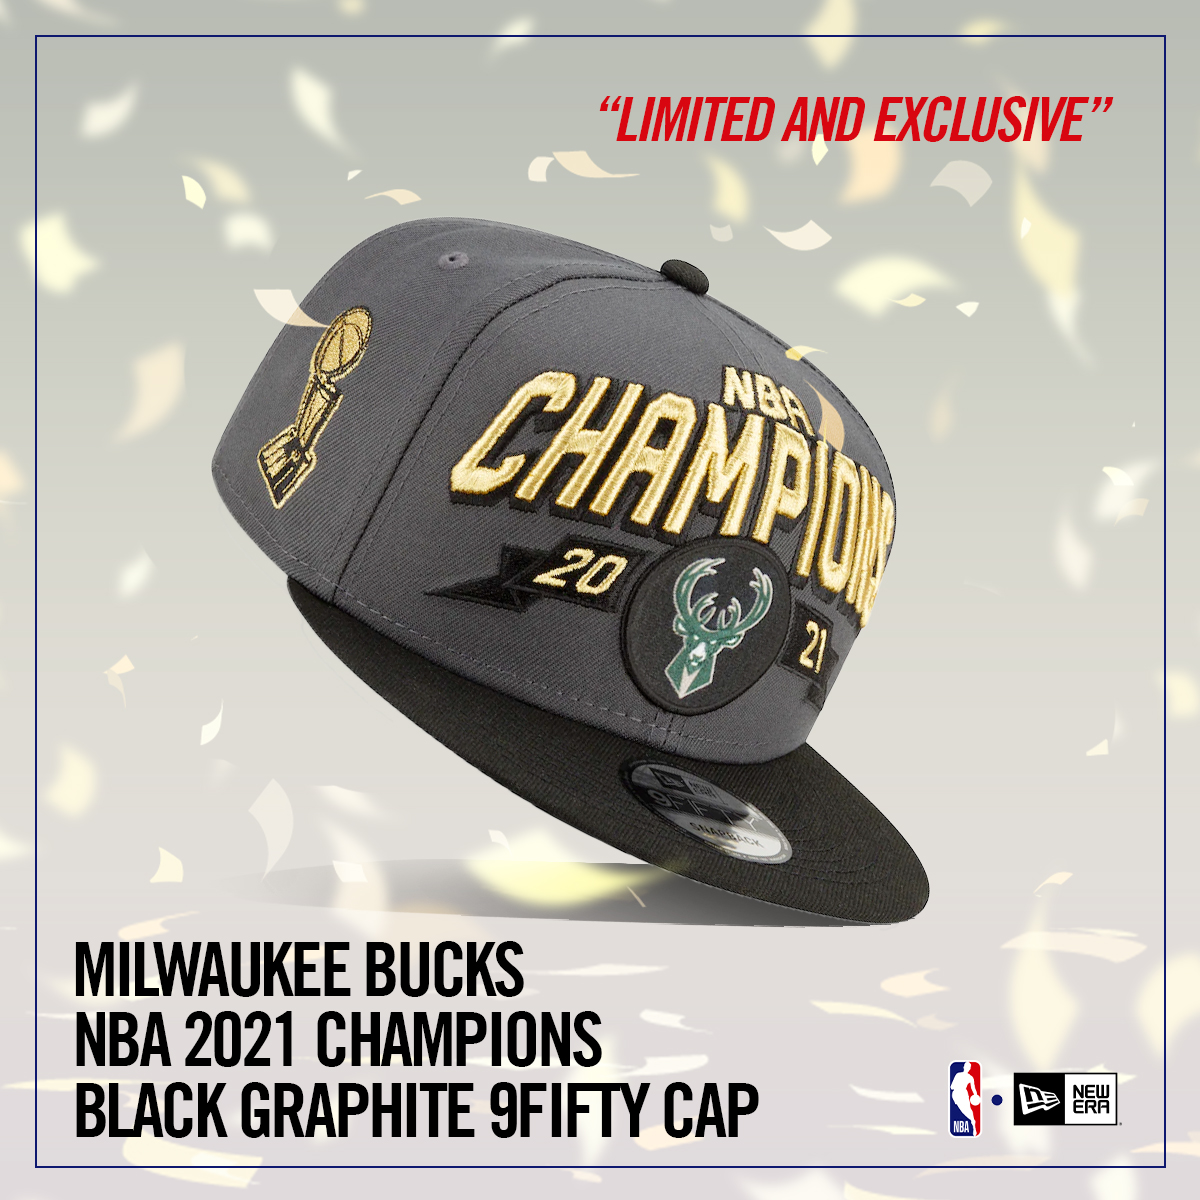 New Era Cap on X: The #NBA Mini Cap Collection Case makes a big gift for  someone… or yourself. All 30 #NBA teams and a sweet case to display the  collection. Available